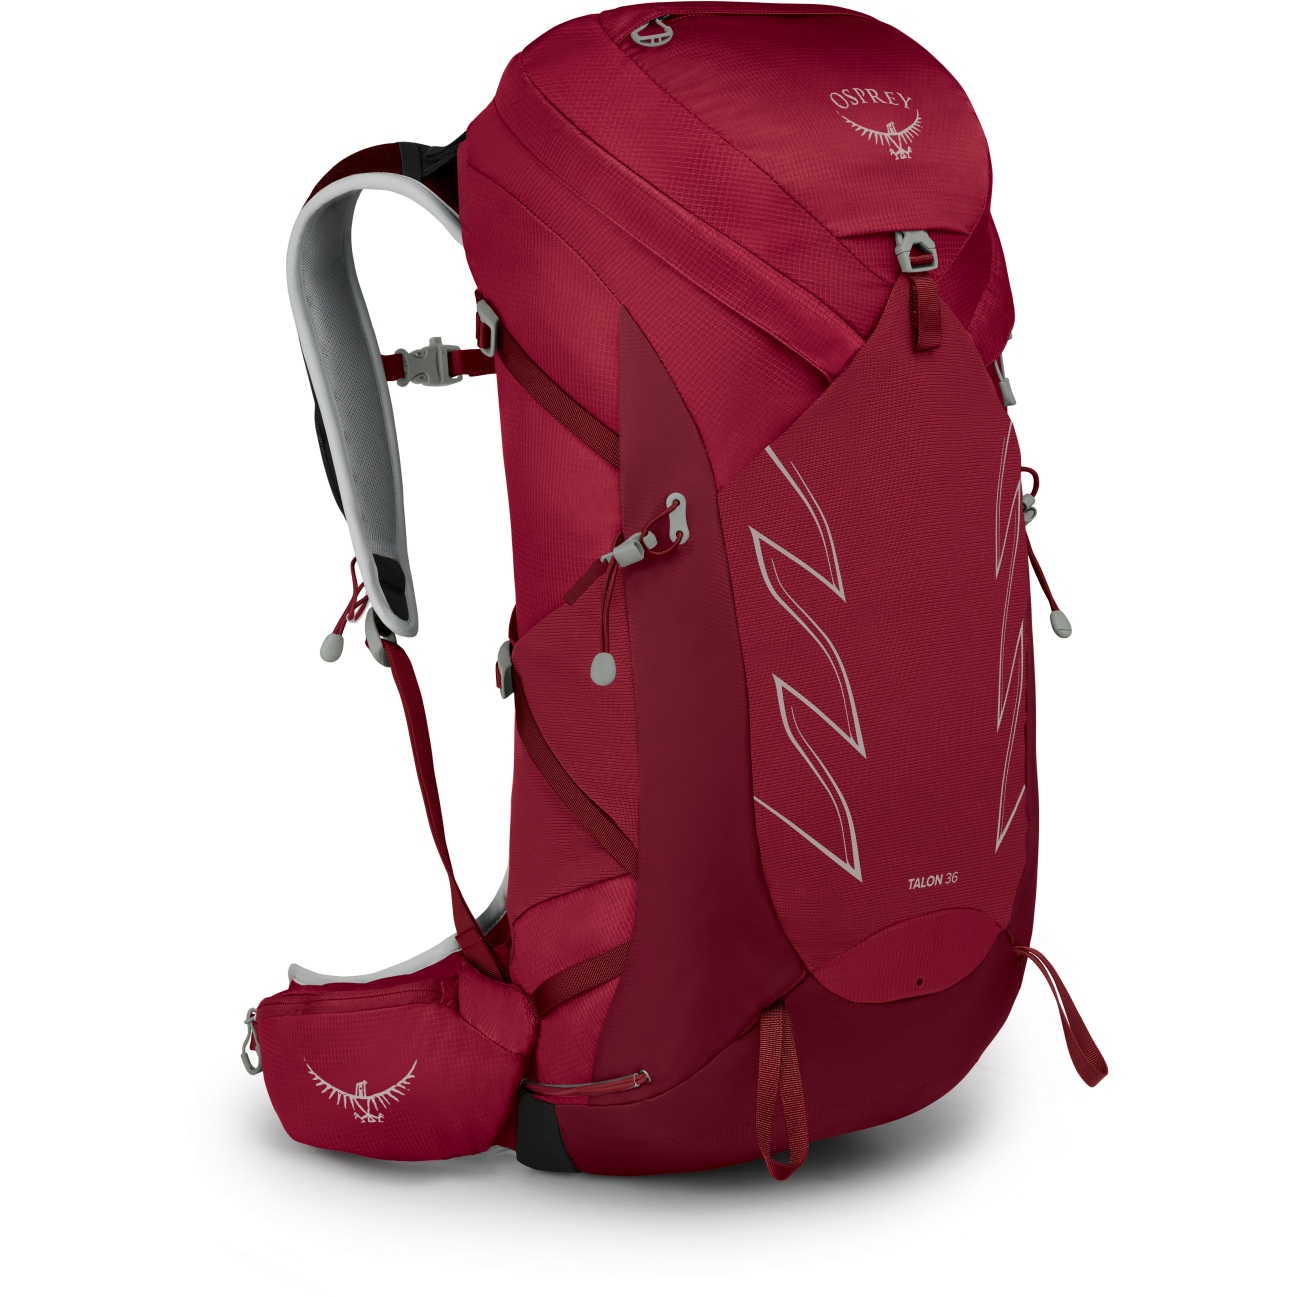 Picture of Osprey Talon 36 Backpack - Cosmic Red - S/M